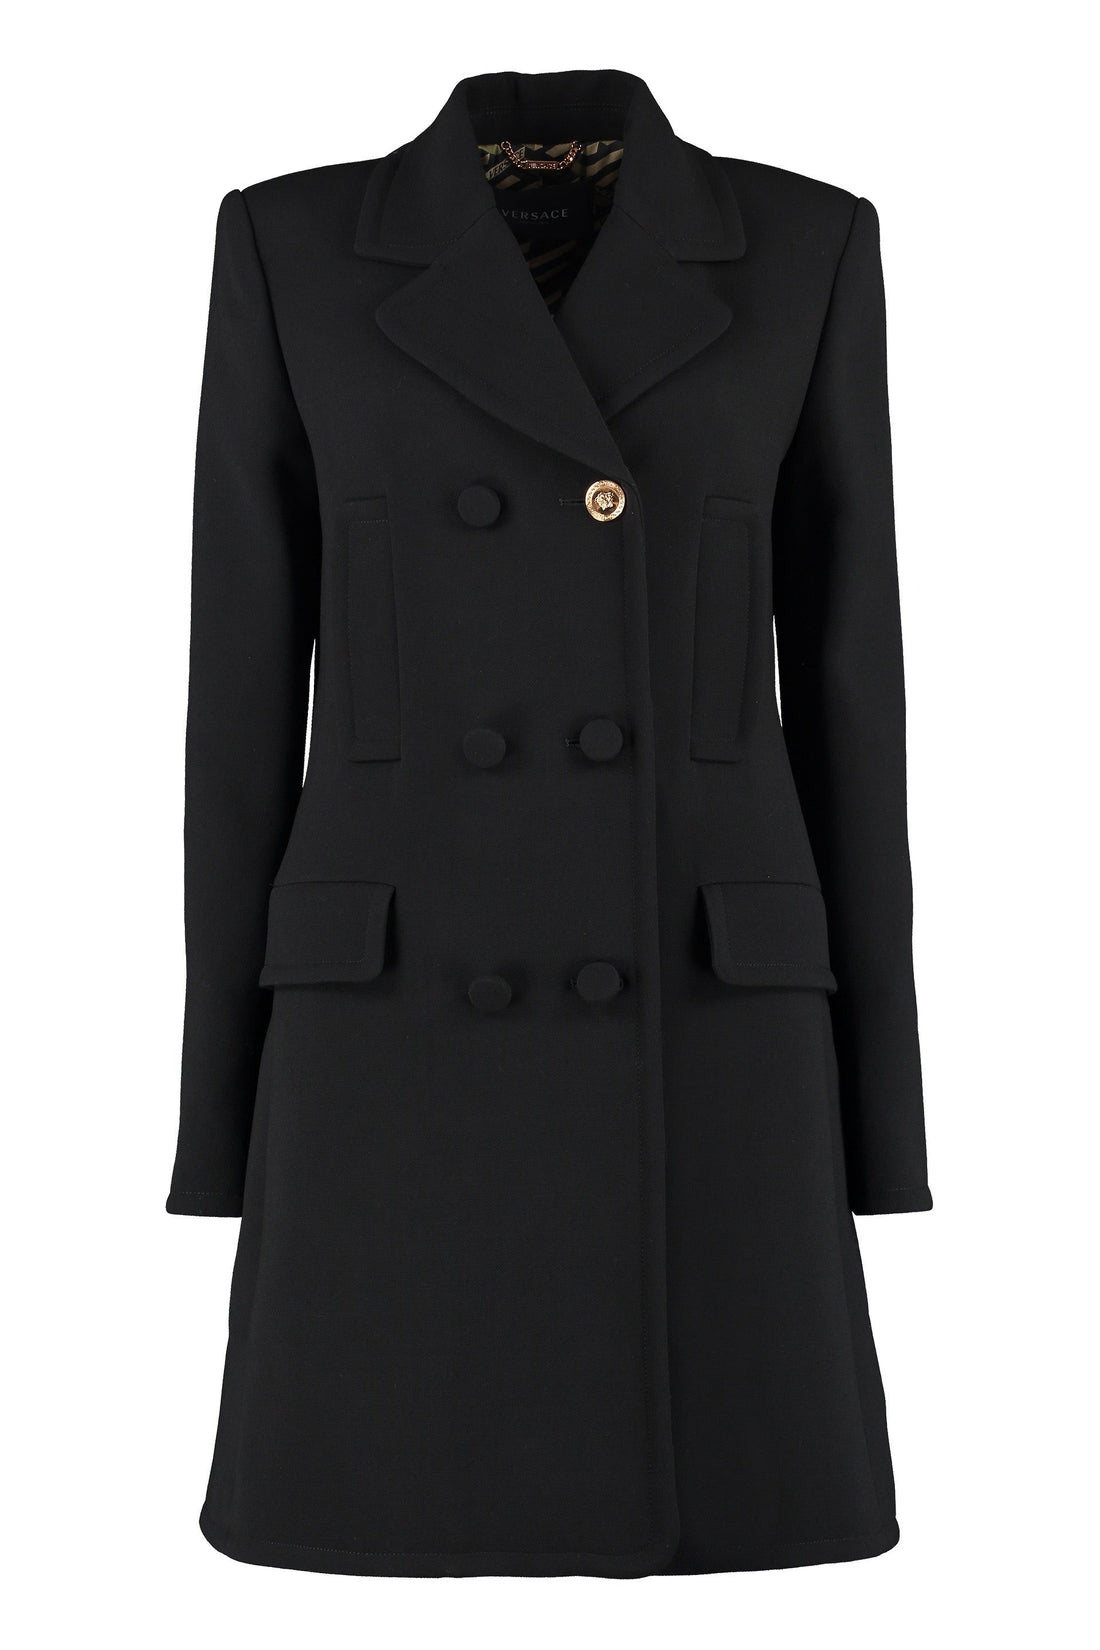 Versace-OUTLET-SALE-Double-breasted wool coat-ARCHIVIST